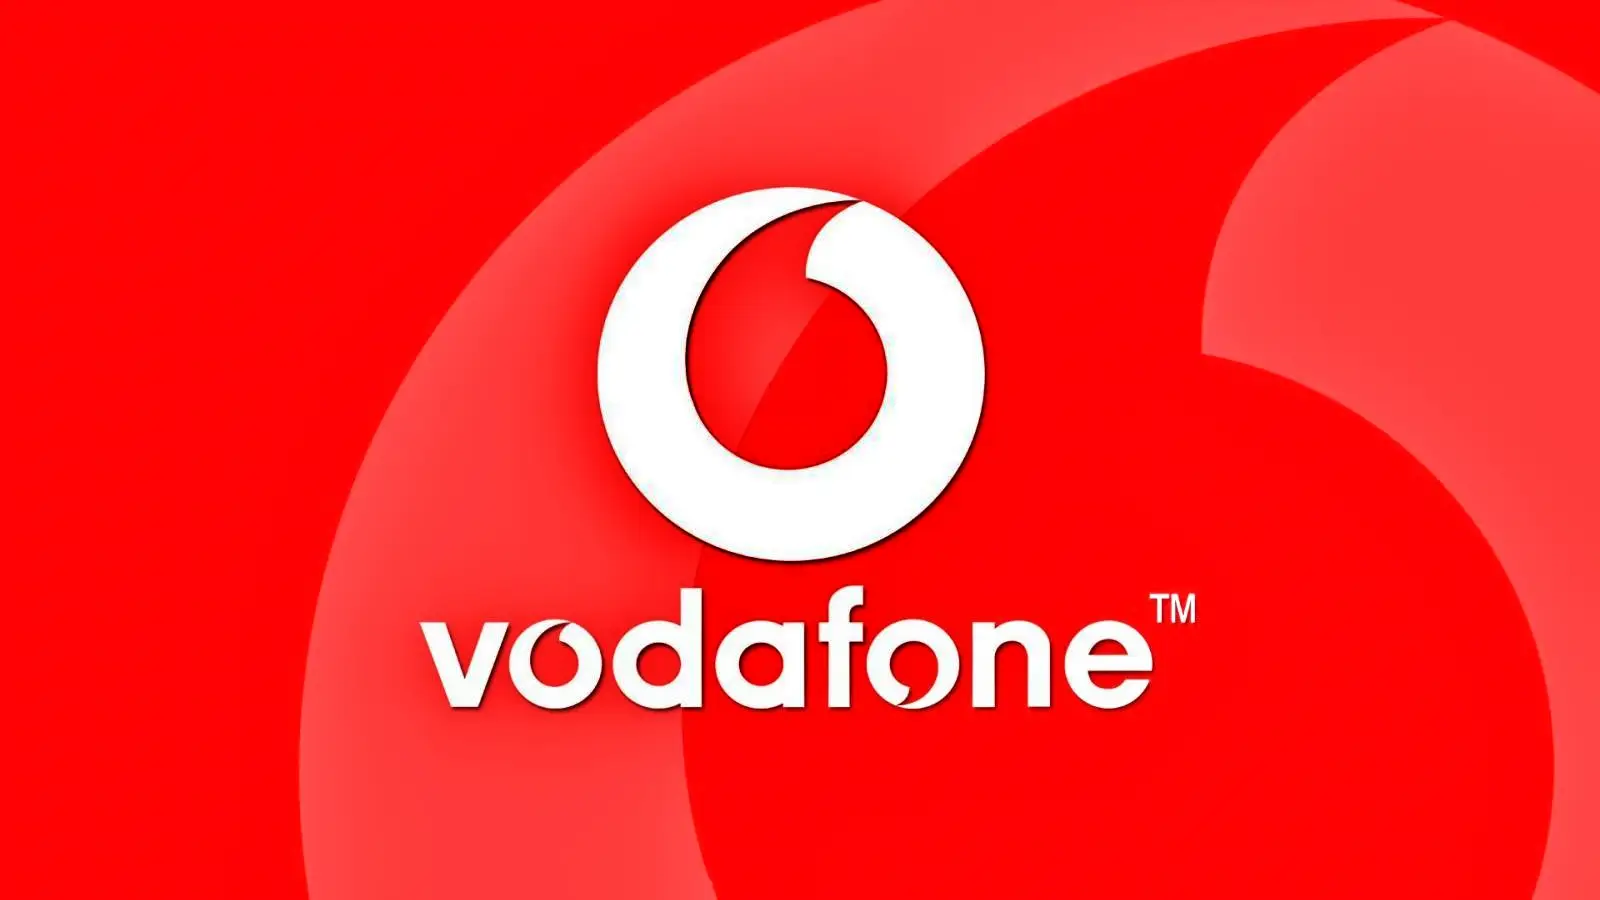 Vodafone Revolut give 100 LEI FREE You must do